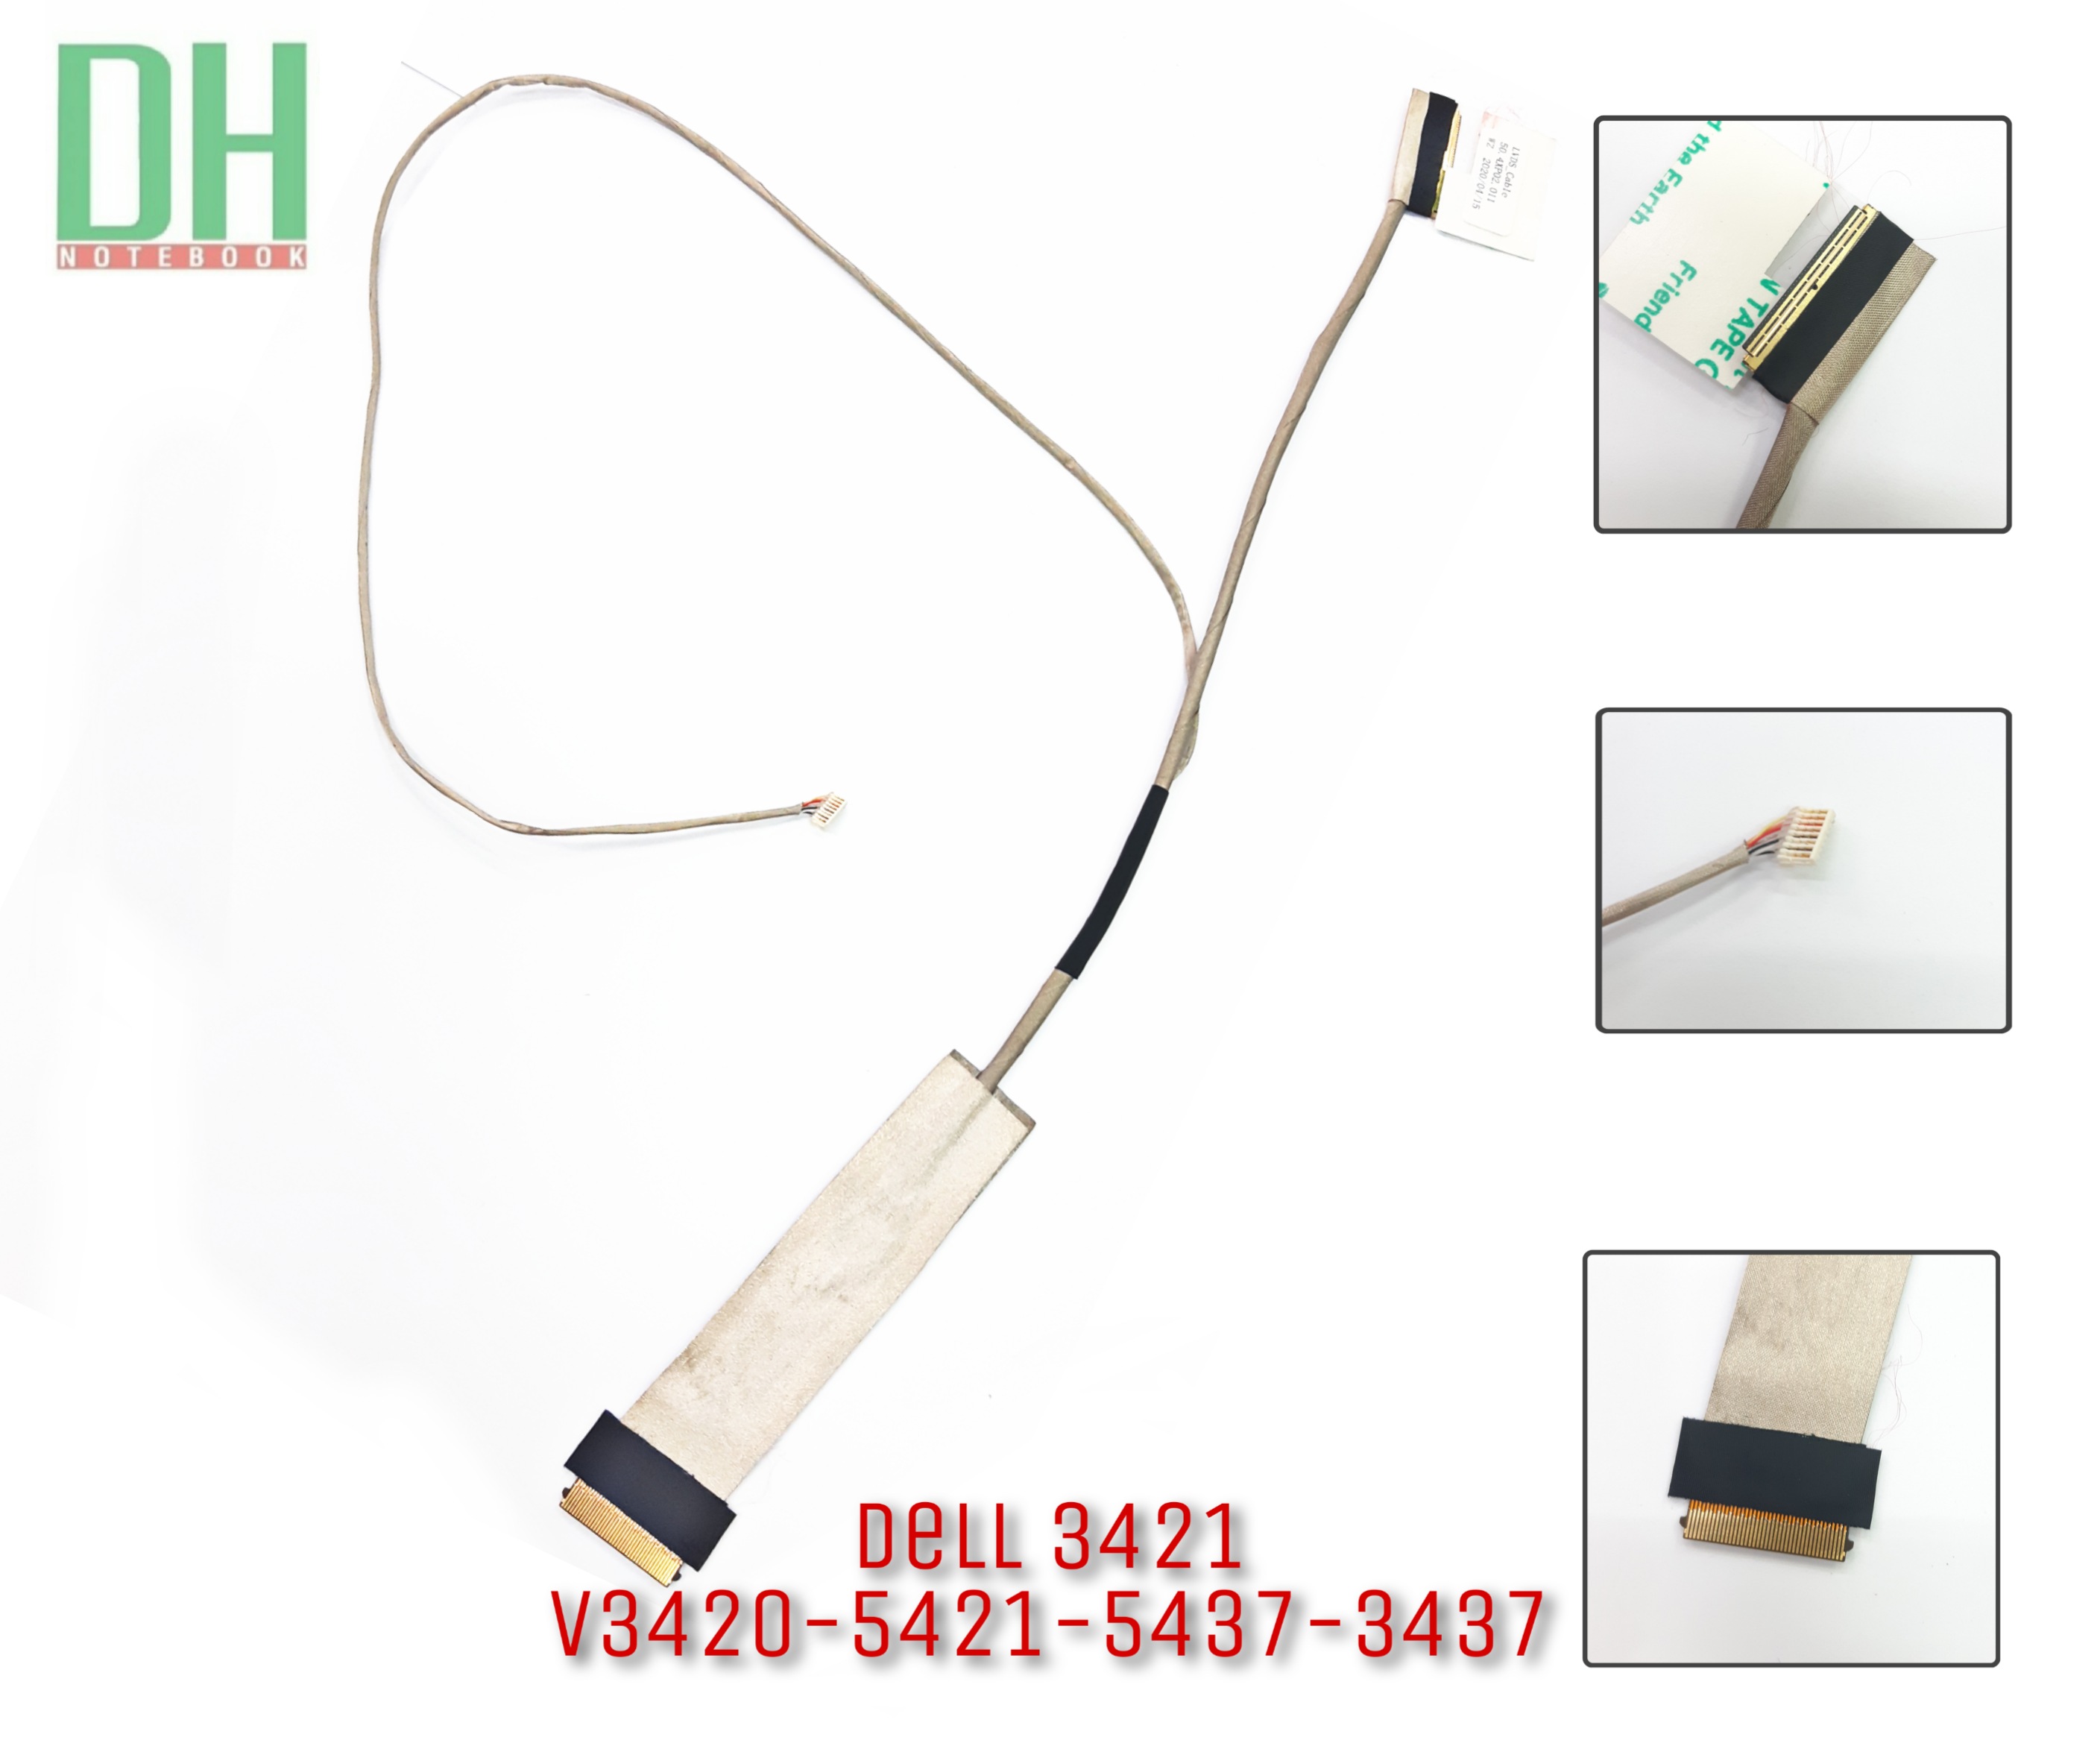 Dell 3421 Video Cable